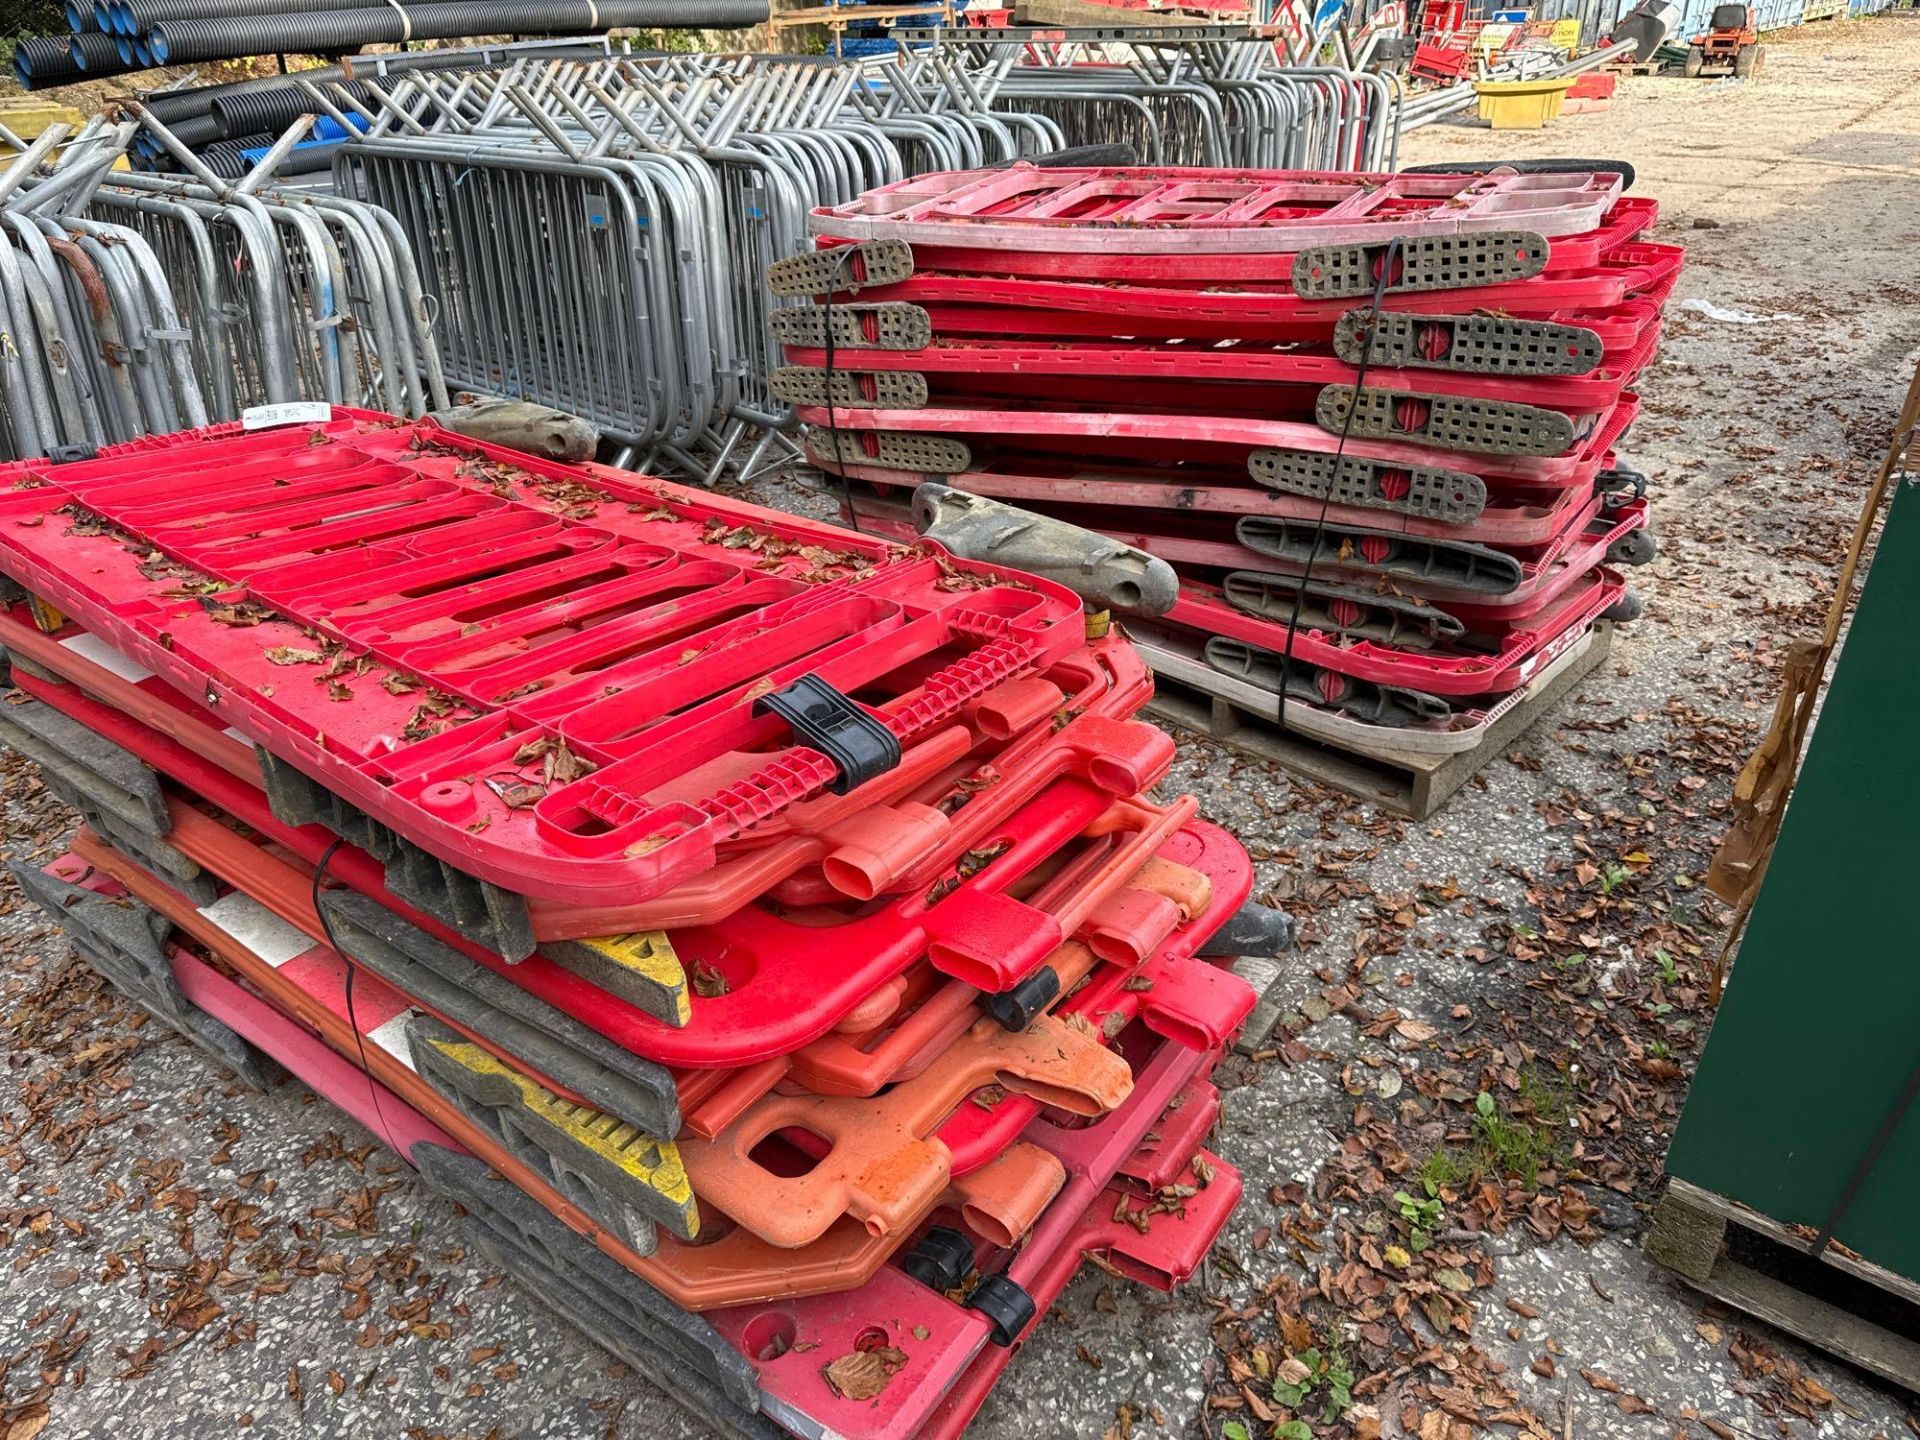 Approx 40 plastic crash barriers